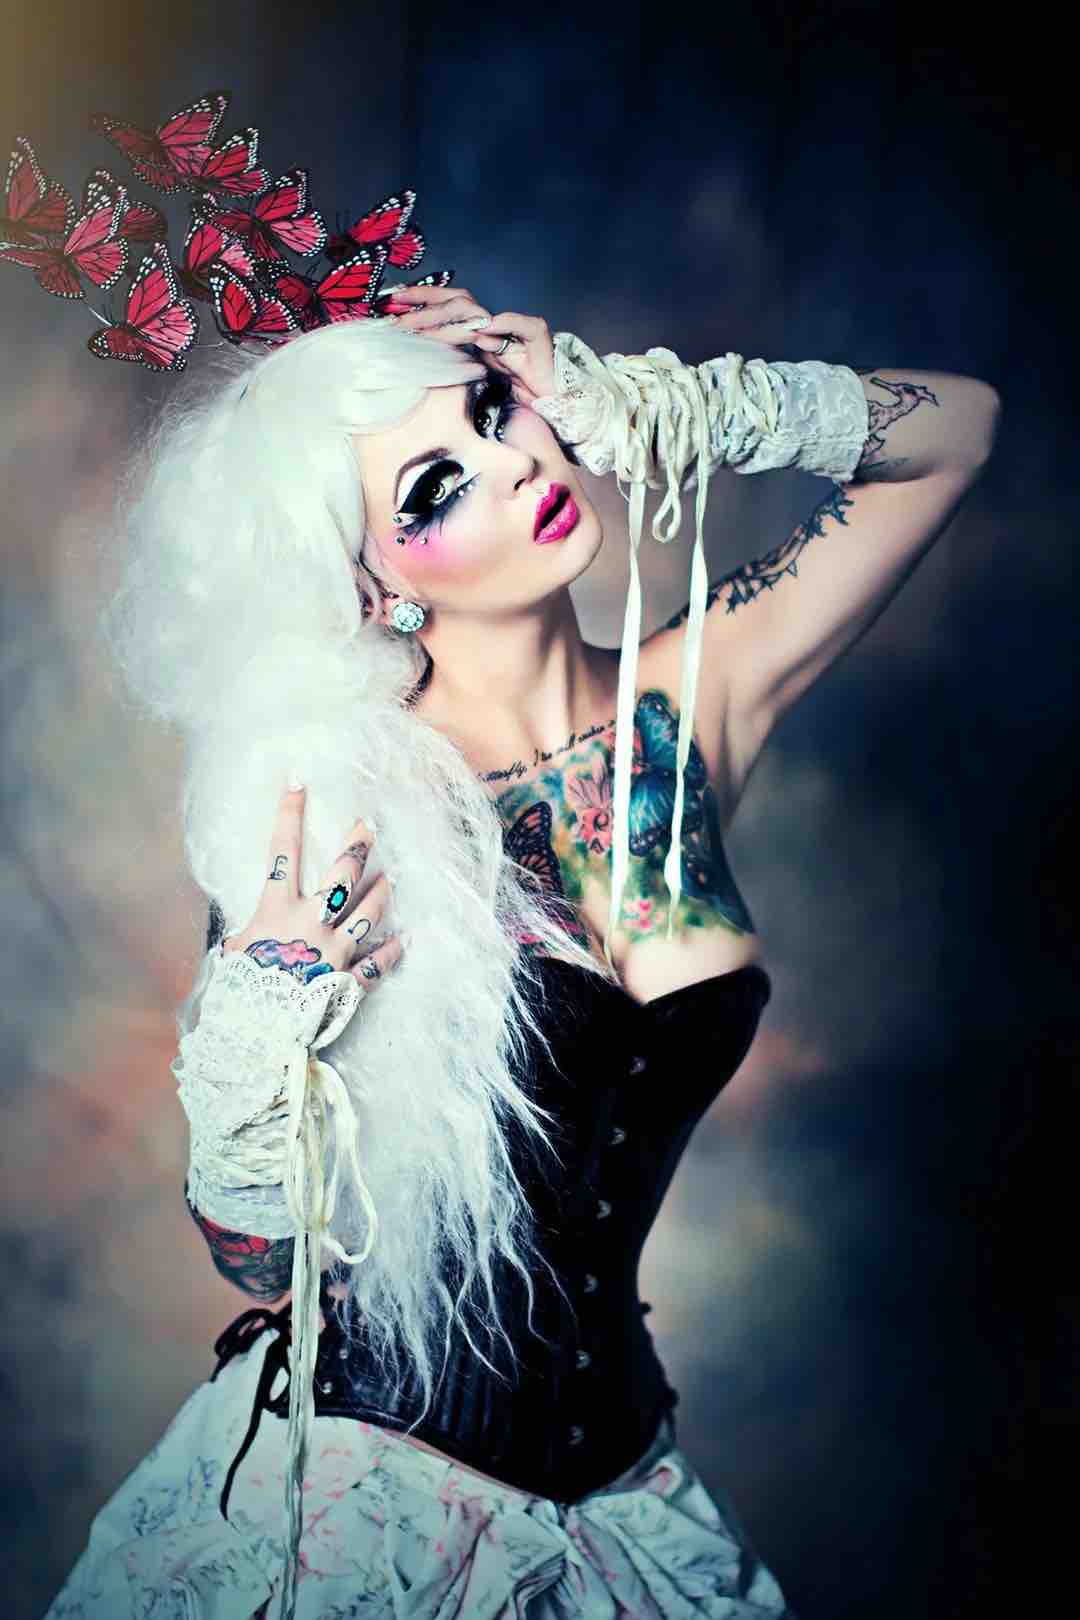 A model with long white hair and white lace gloves wearing the Black Leather Short Overbust Corset -Slim over a floral skirt.